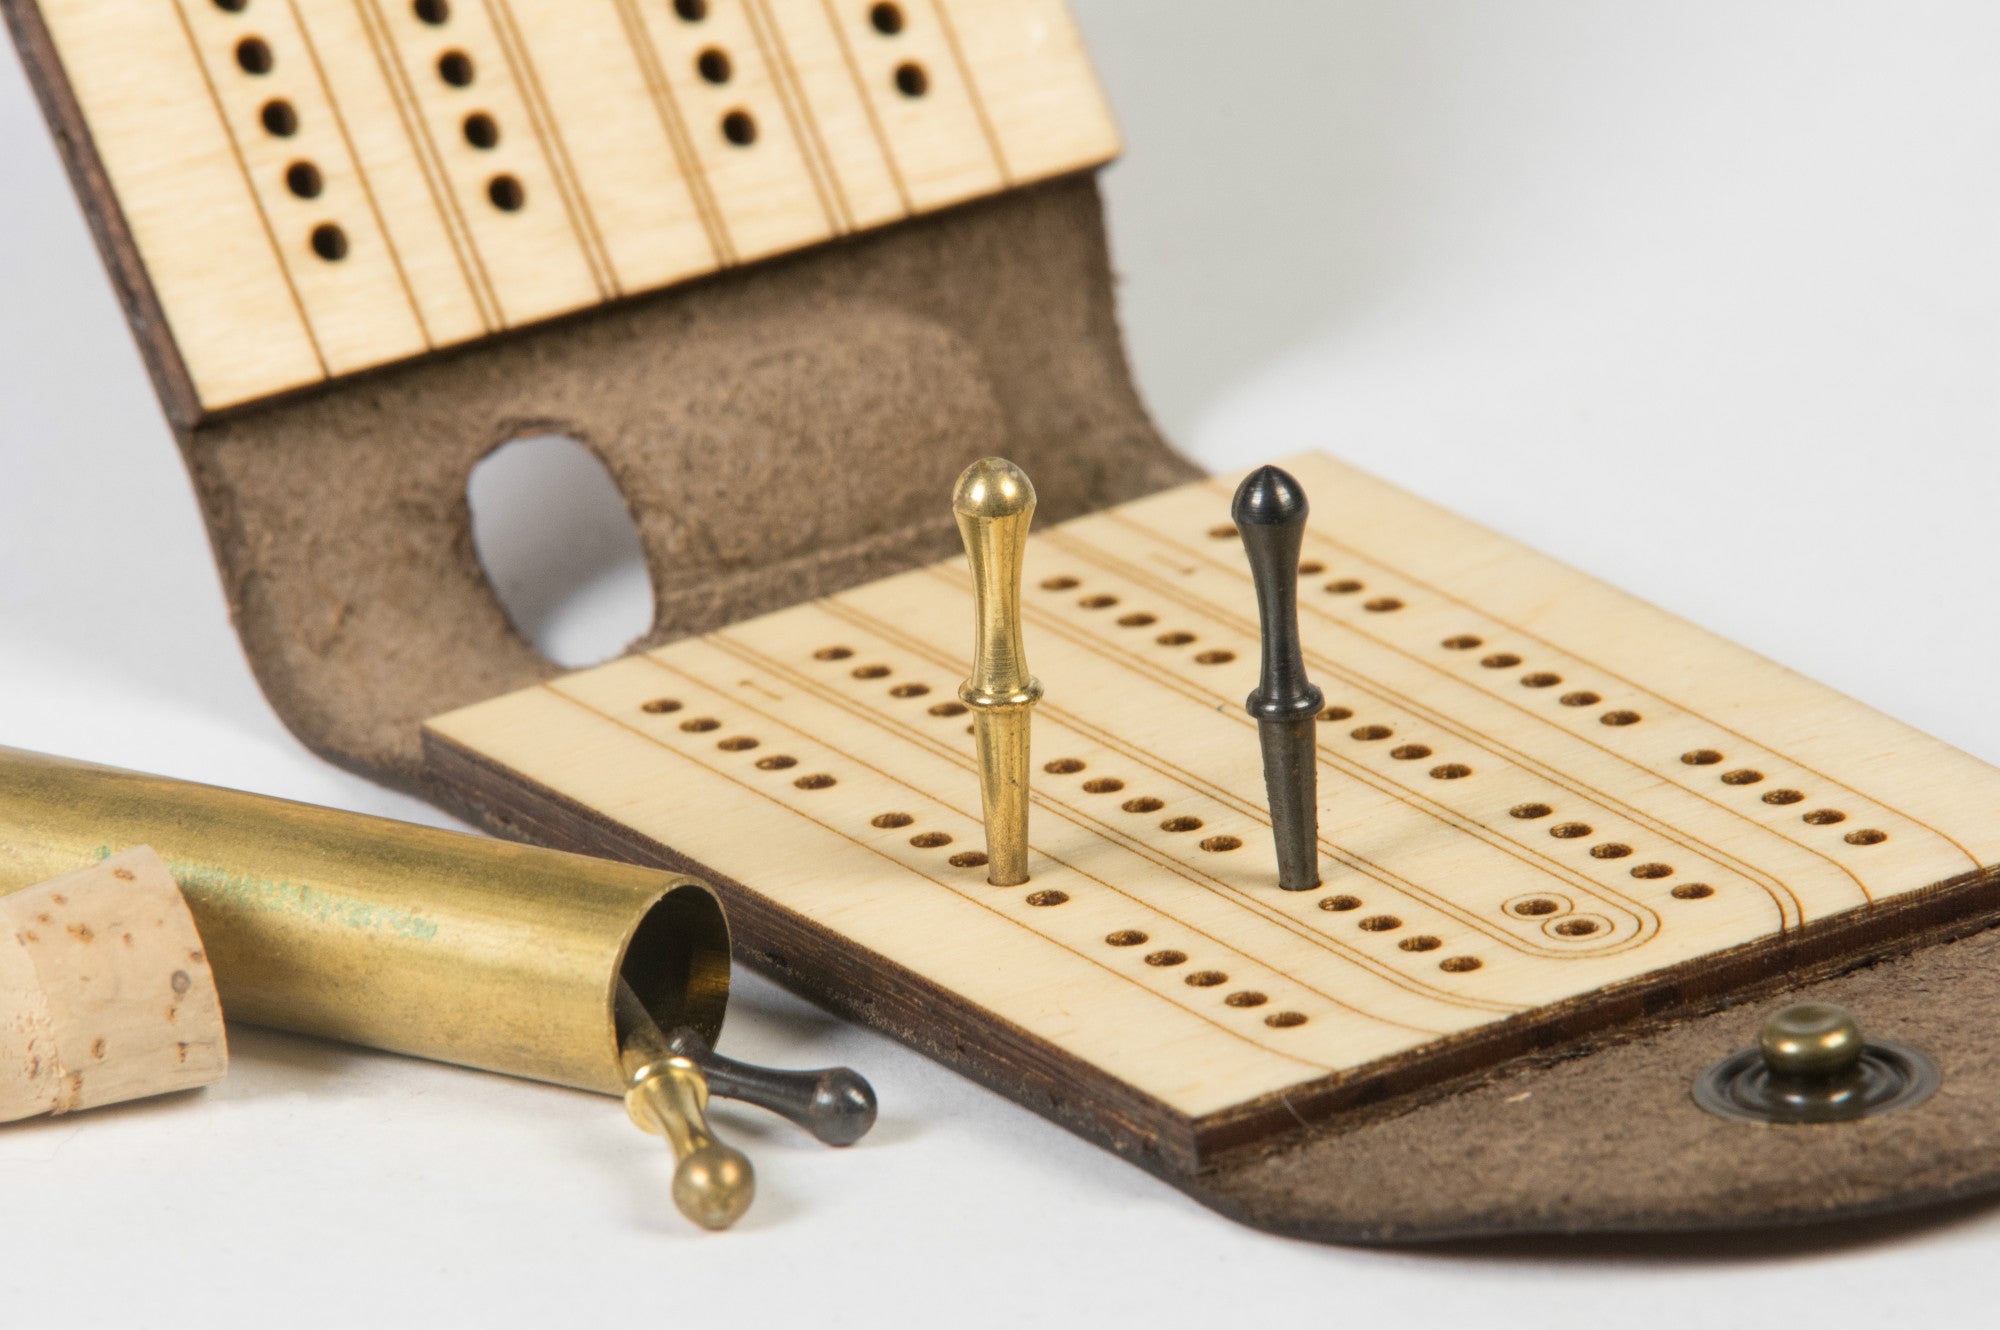 New peg options for our Travel Cribbage Board!